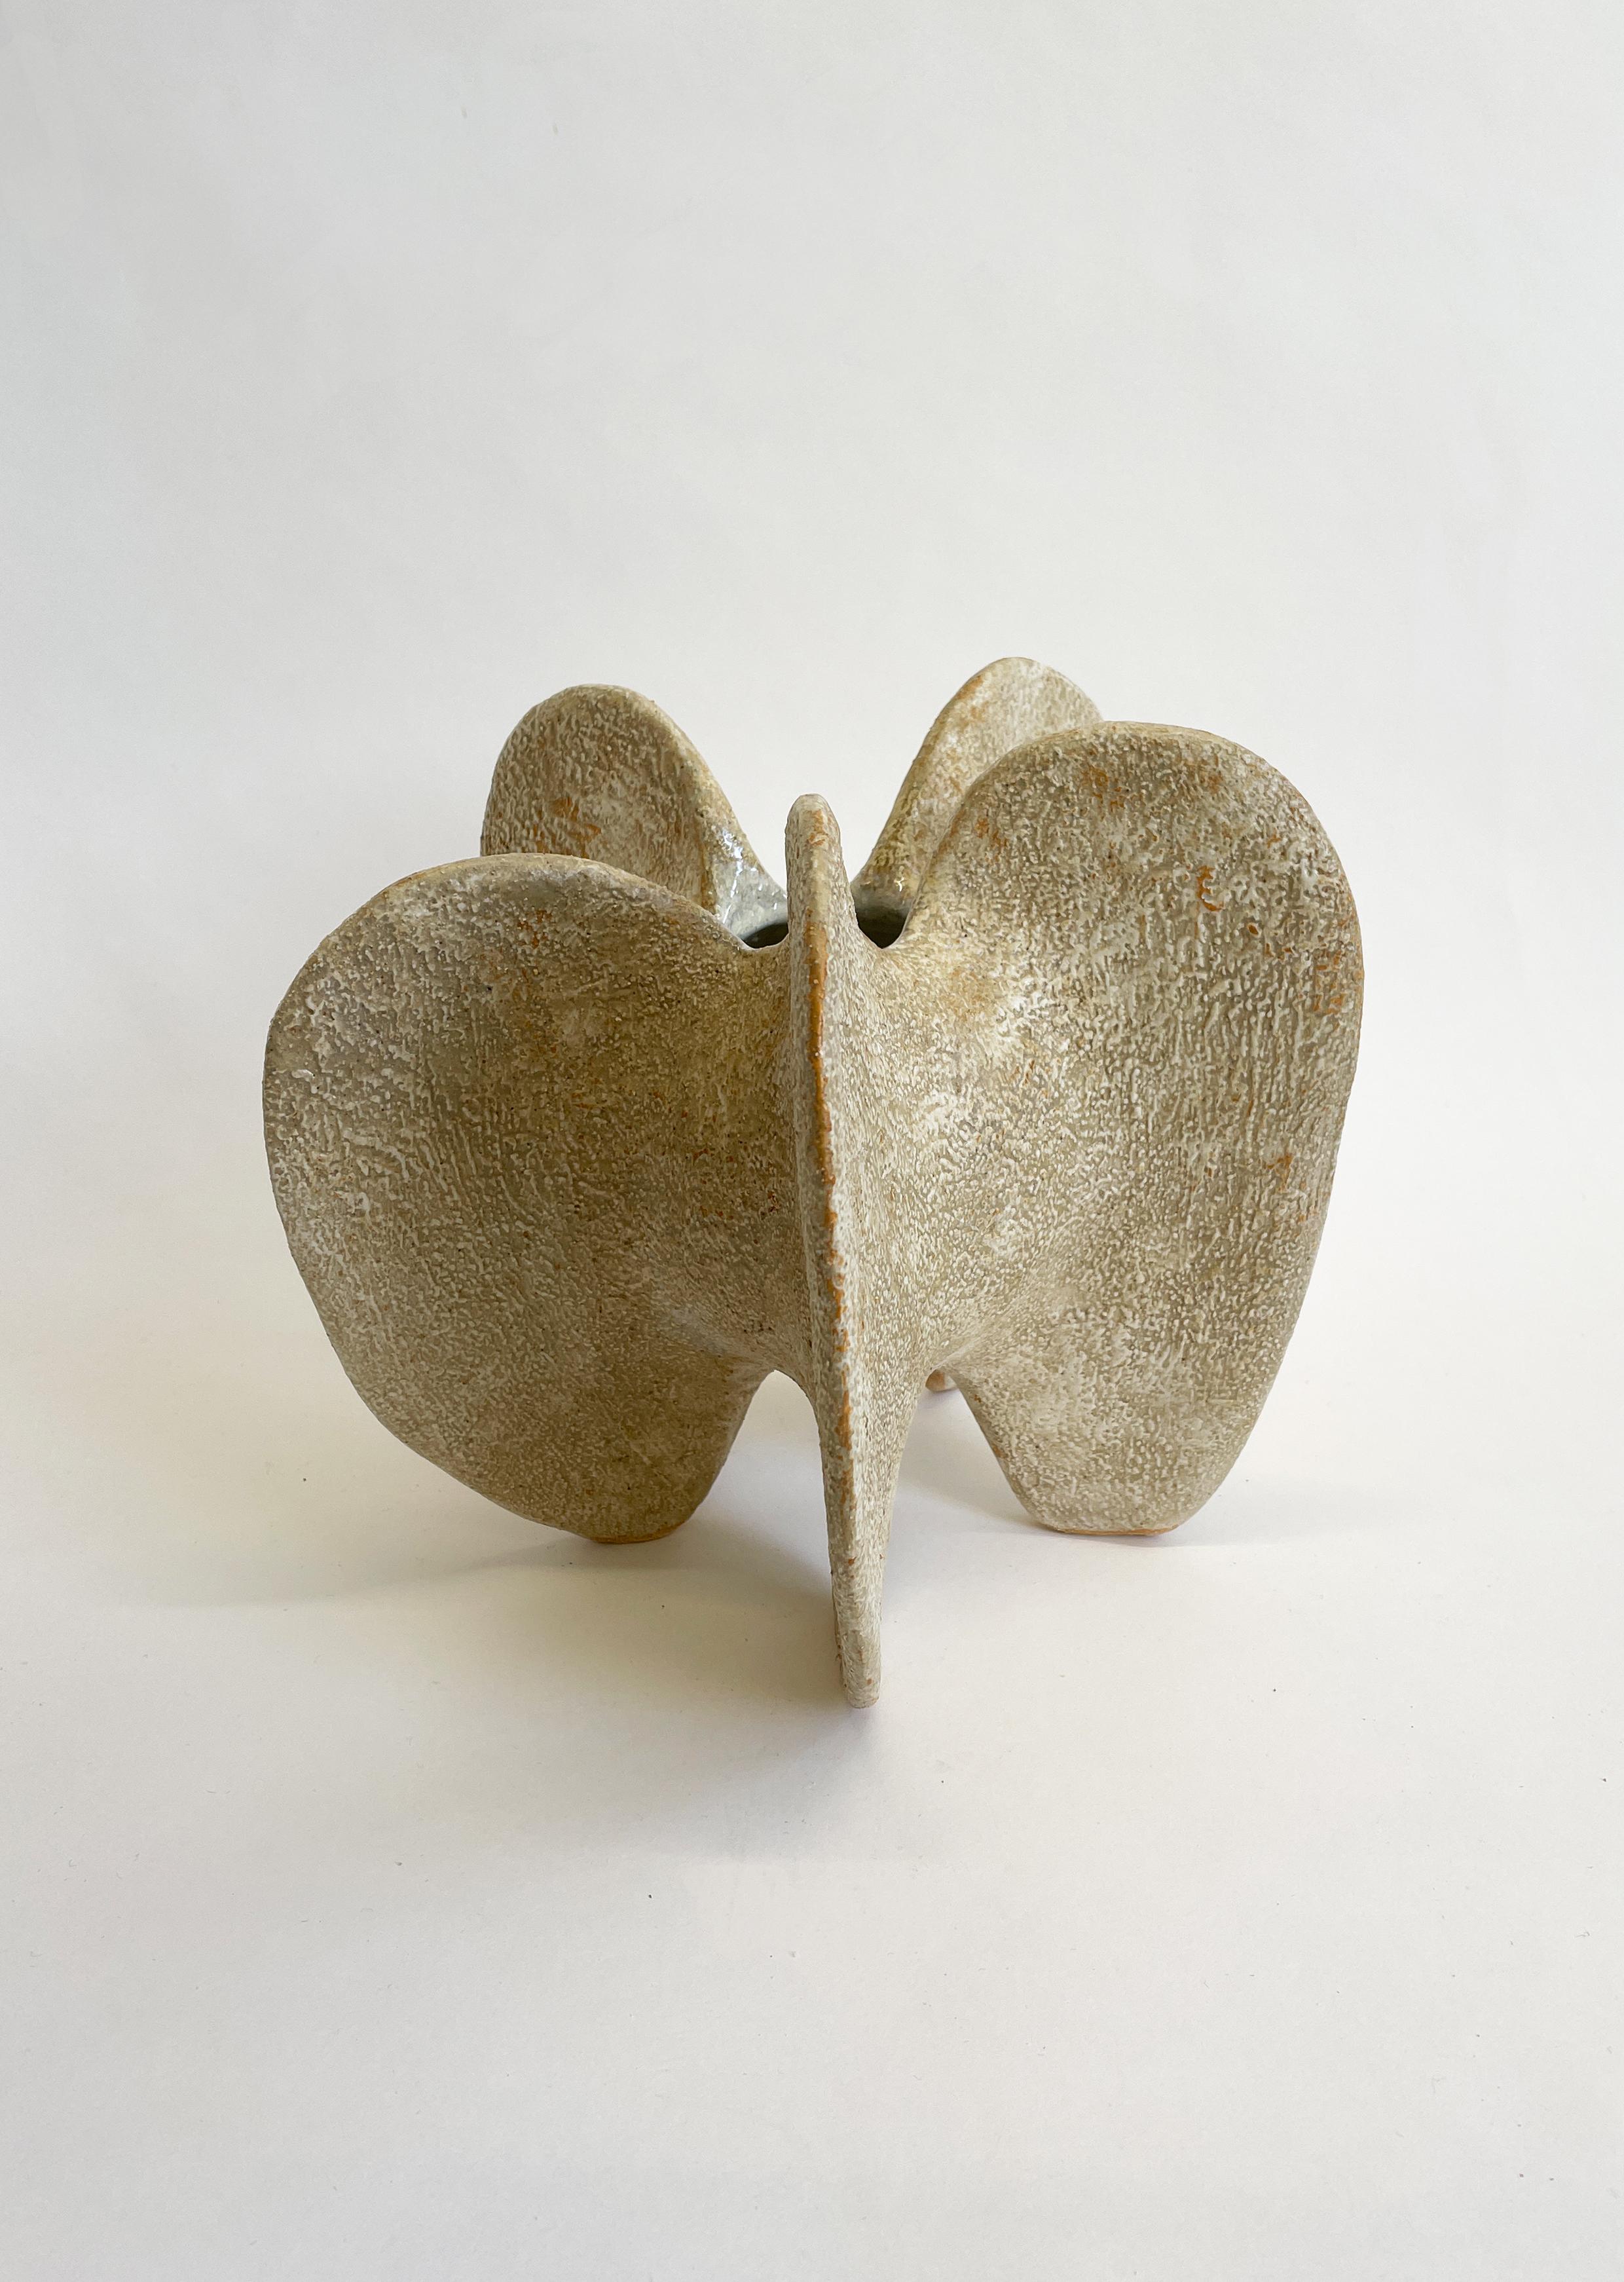 Ochre mid pentacle III by Julie Nelson.
One of a kind.
Dimensions: W 24 x D 30 x H 22 cm.
Materials: ceramic stoneware and porcelain.

Artist Julie Nelson uses the materiality of clay as a means to explore naturally occurring patterns and